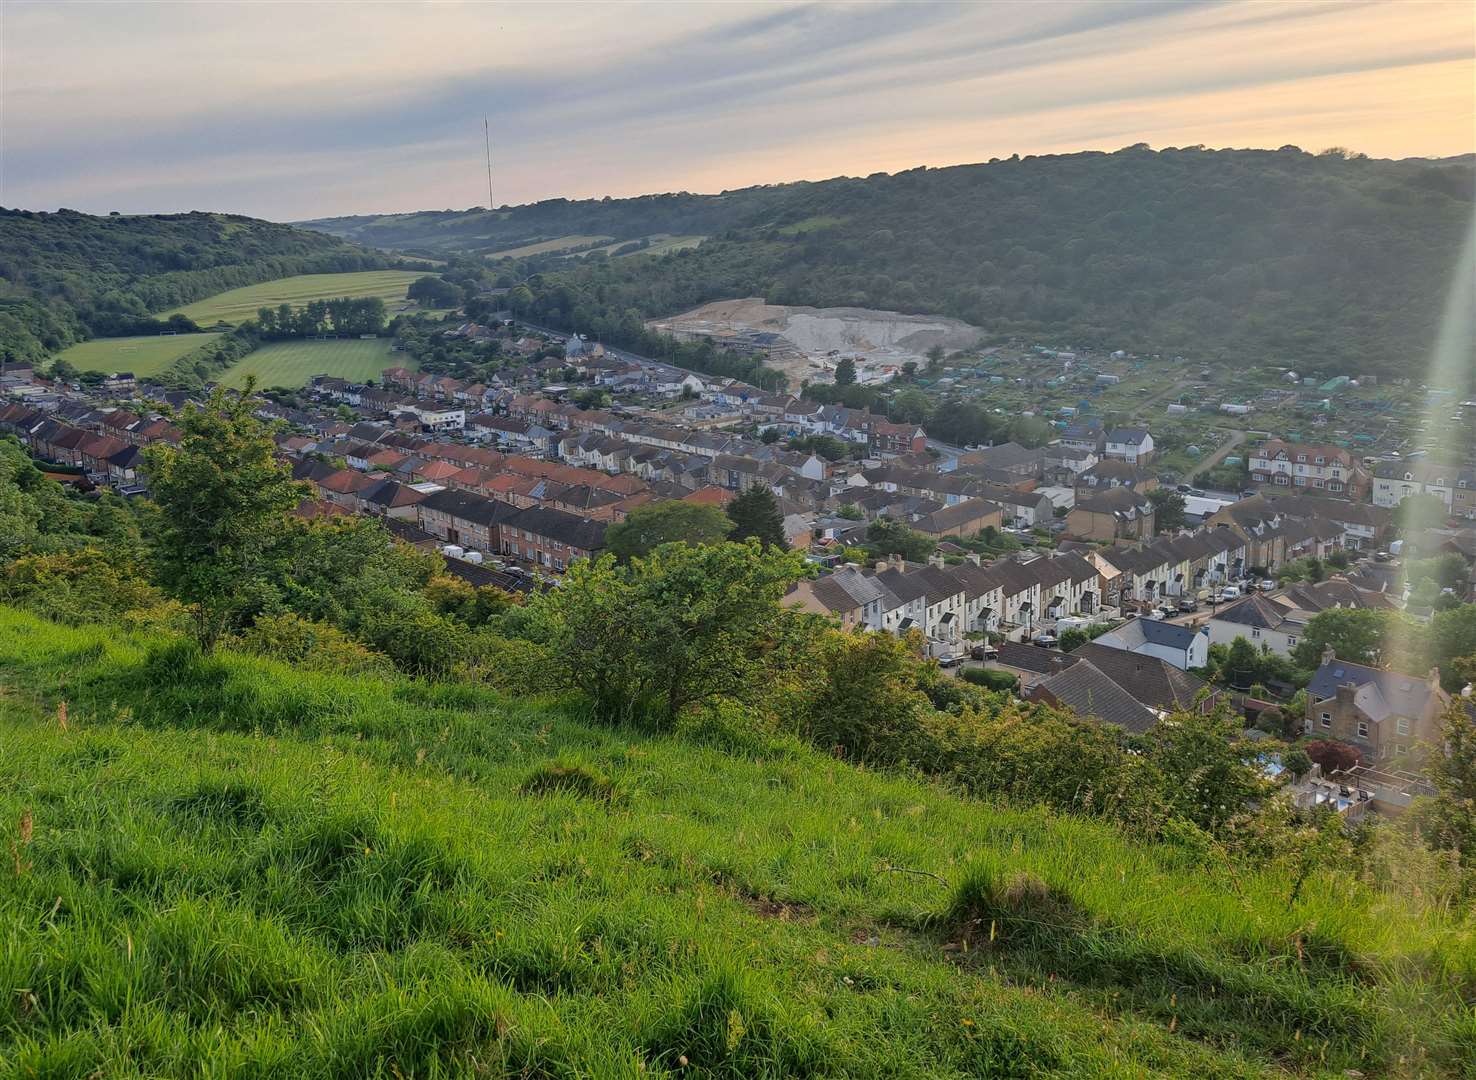 View from the hills to Folkestone Road and Maxton. The chalky area is the site of a new housing development